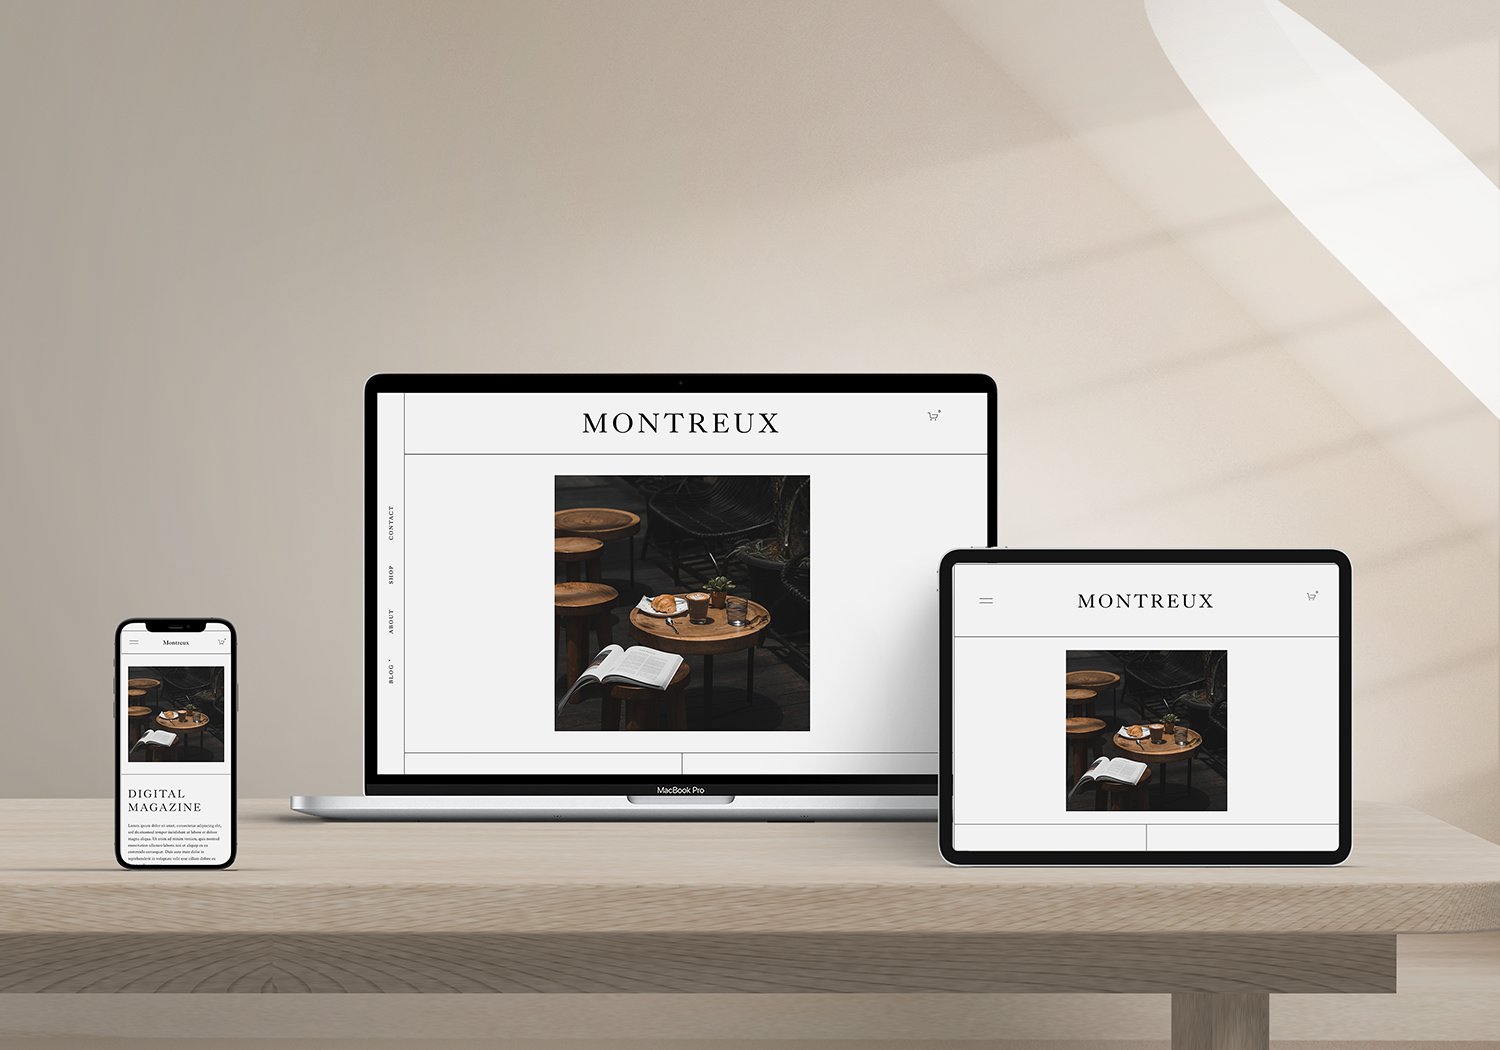 Montreux Squarespace 7.1 Template cover image.